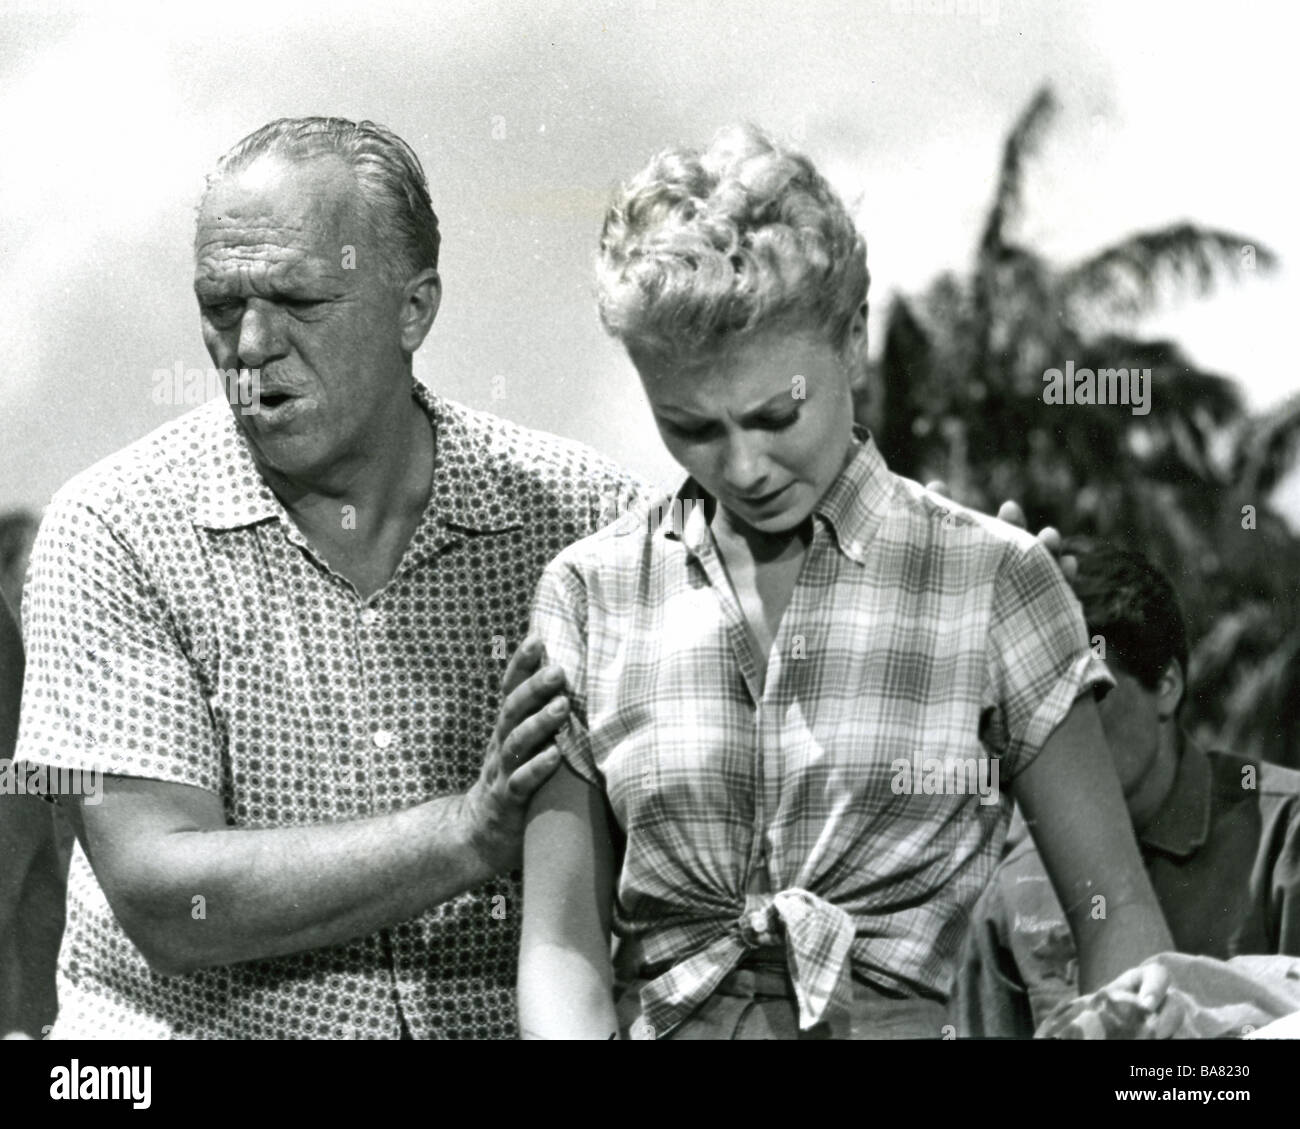 SOUTH PACIFIC 1958 Magna film musical. Director Joshua Logan rehearses a scene with Mitzi Gaynor Stock Photo